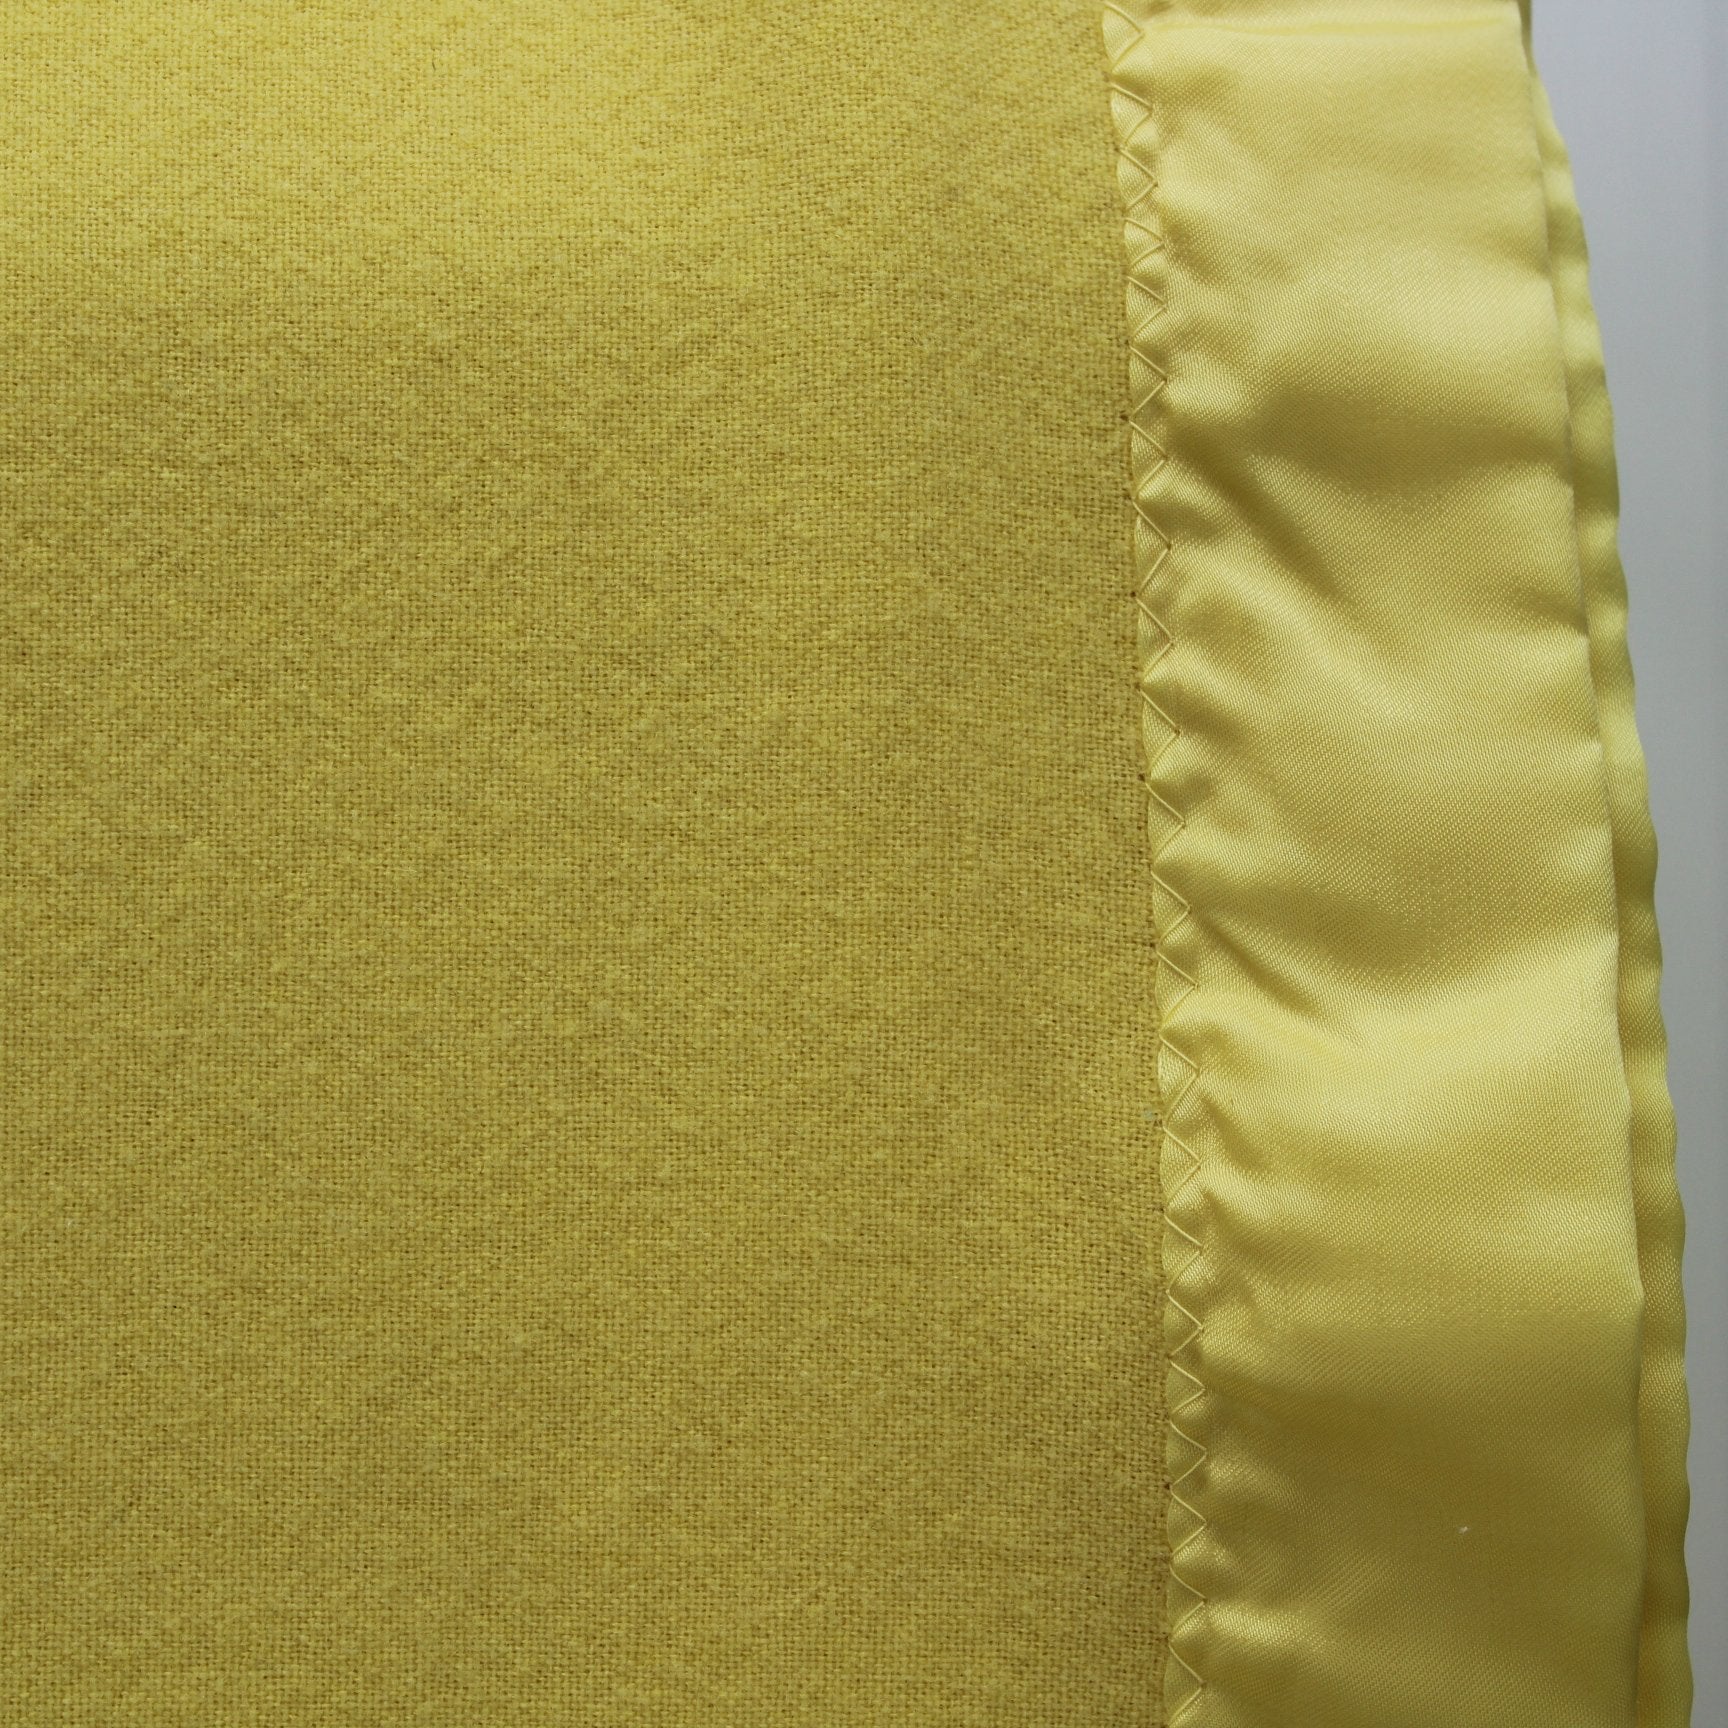 North Star Sheer Wool All Season Yellow Blanket Excellent Vintage closeup view of beautiful fiber